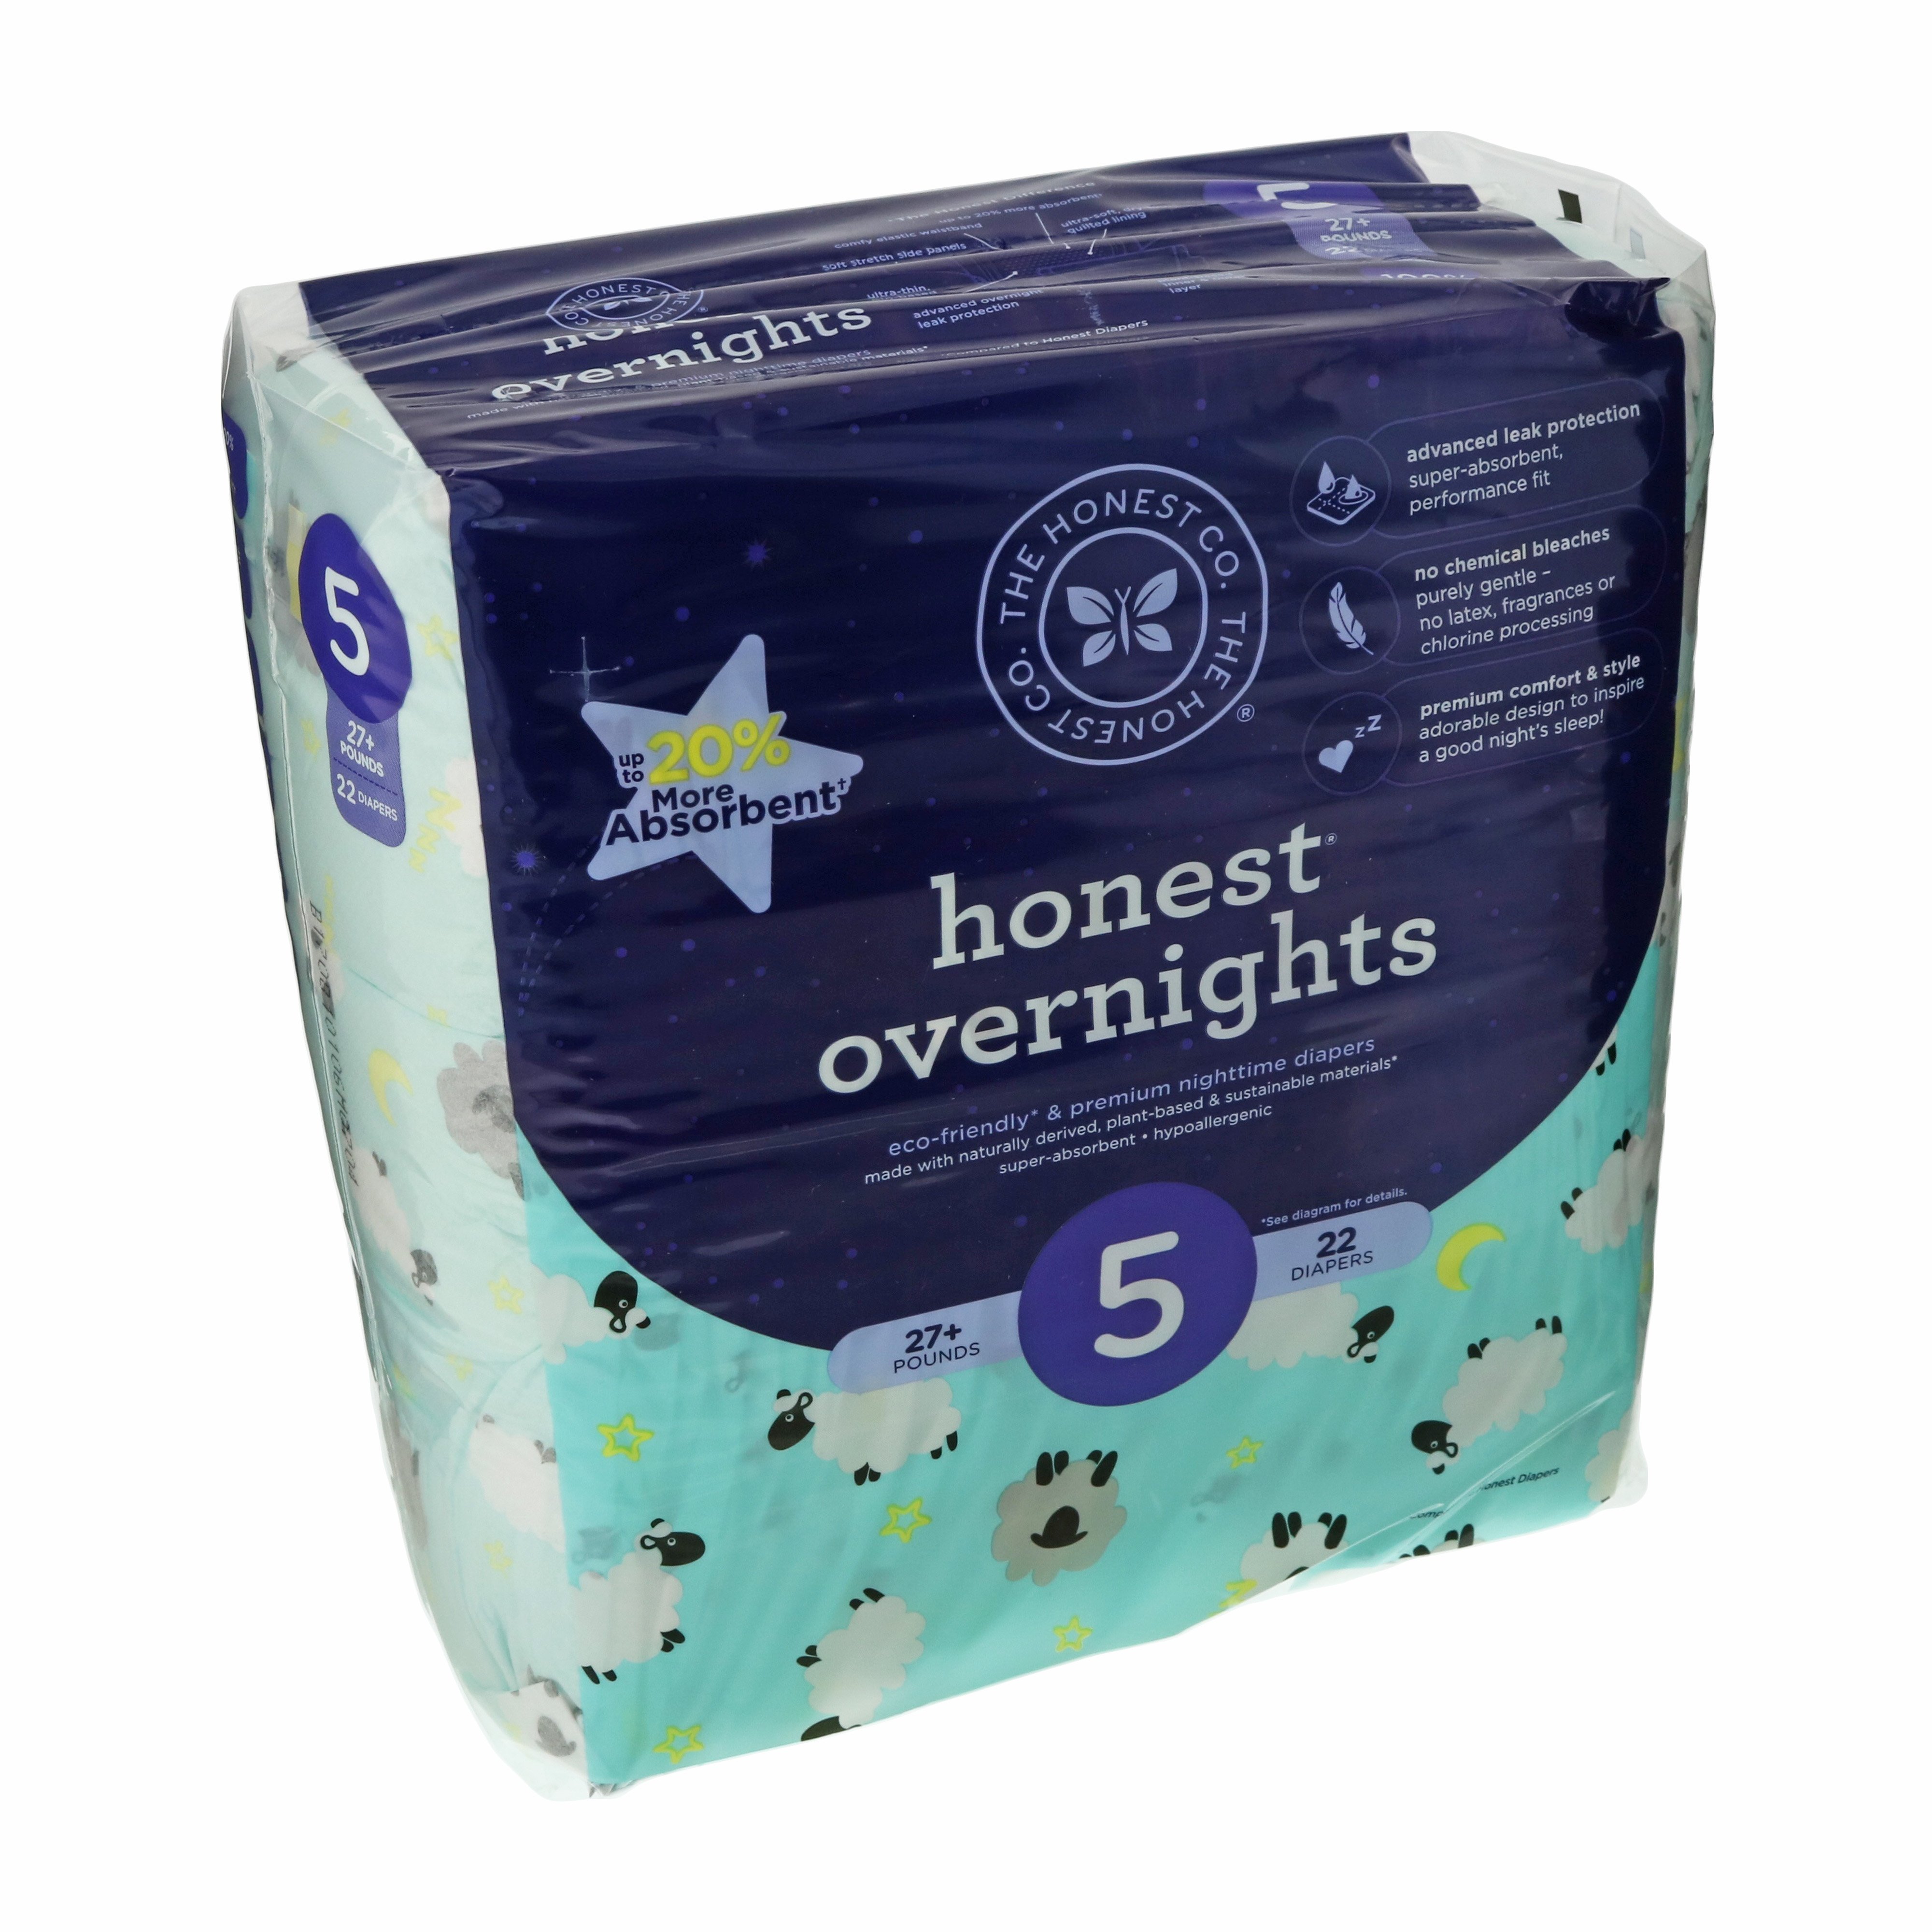 Size 5 Overnight Diapers by Honest Co